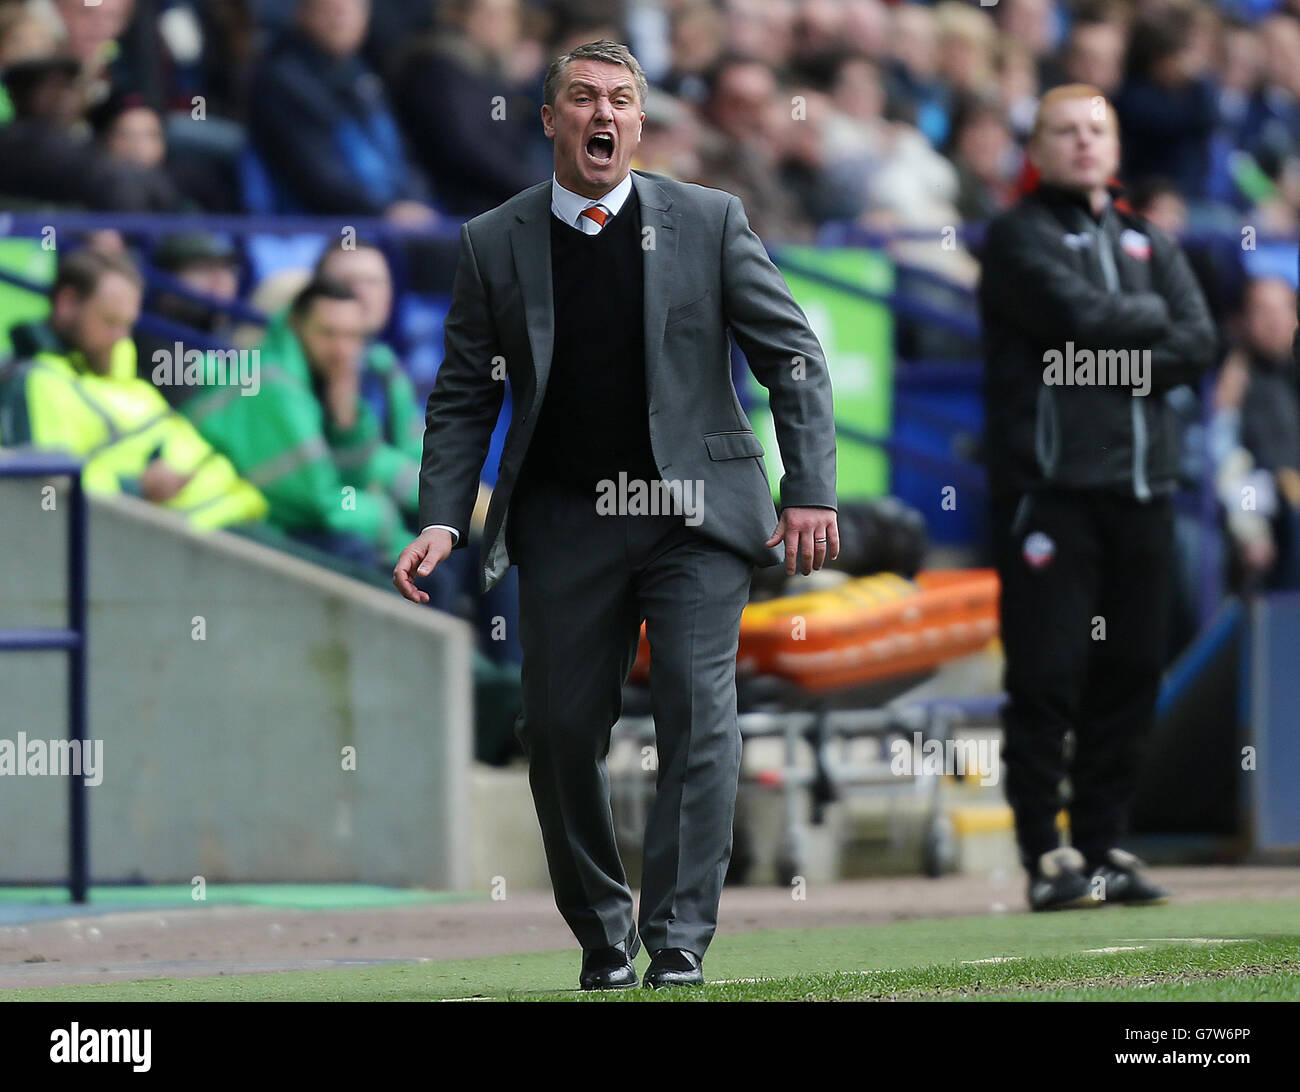 Soccer - Sky Bet Championship - Bolton Wanderers v Blackpool - Macron Stadium. Blackpool's manager Lee Clark screams on his team during the game against Bolton Wanderers Stock Photo